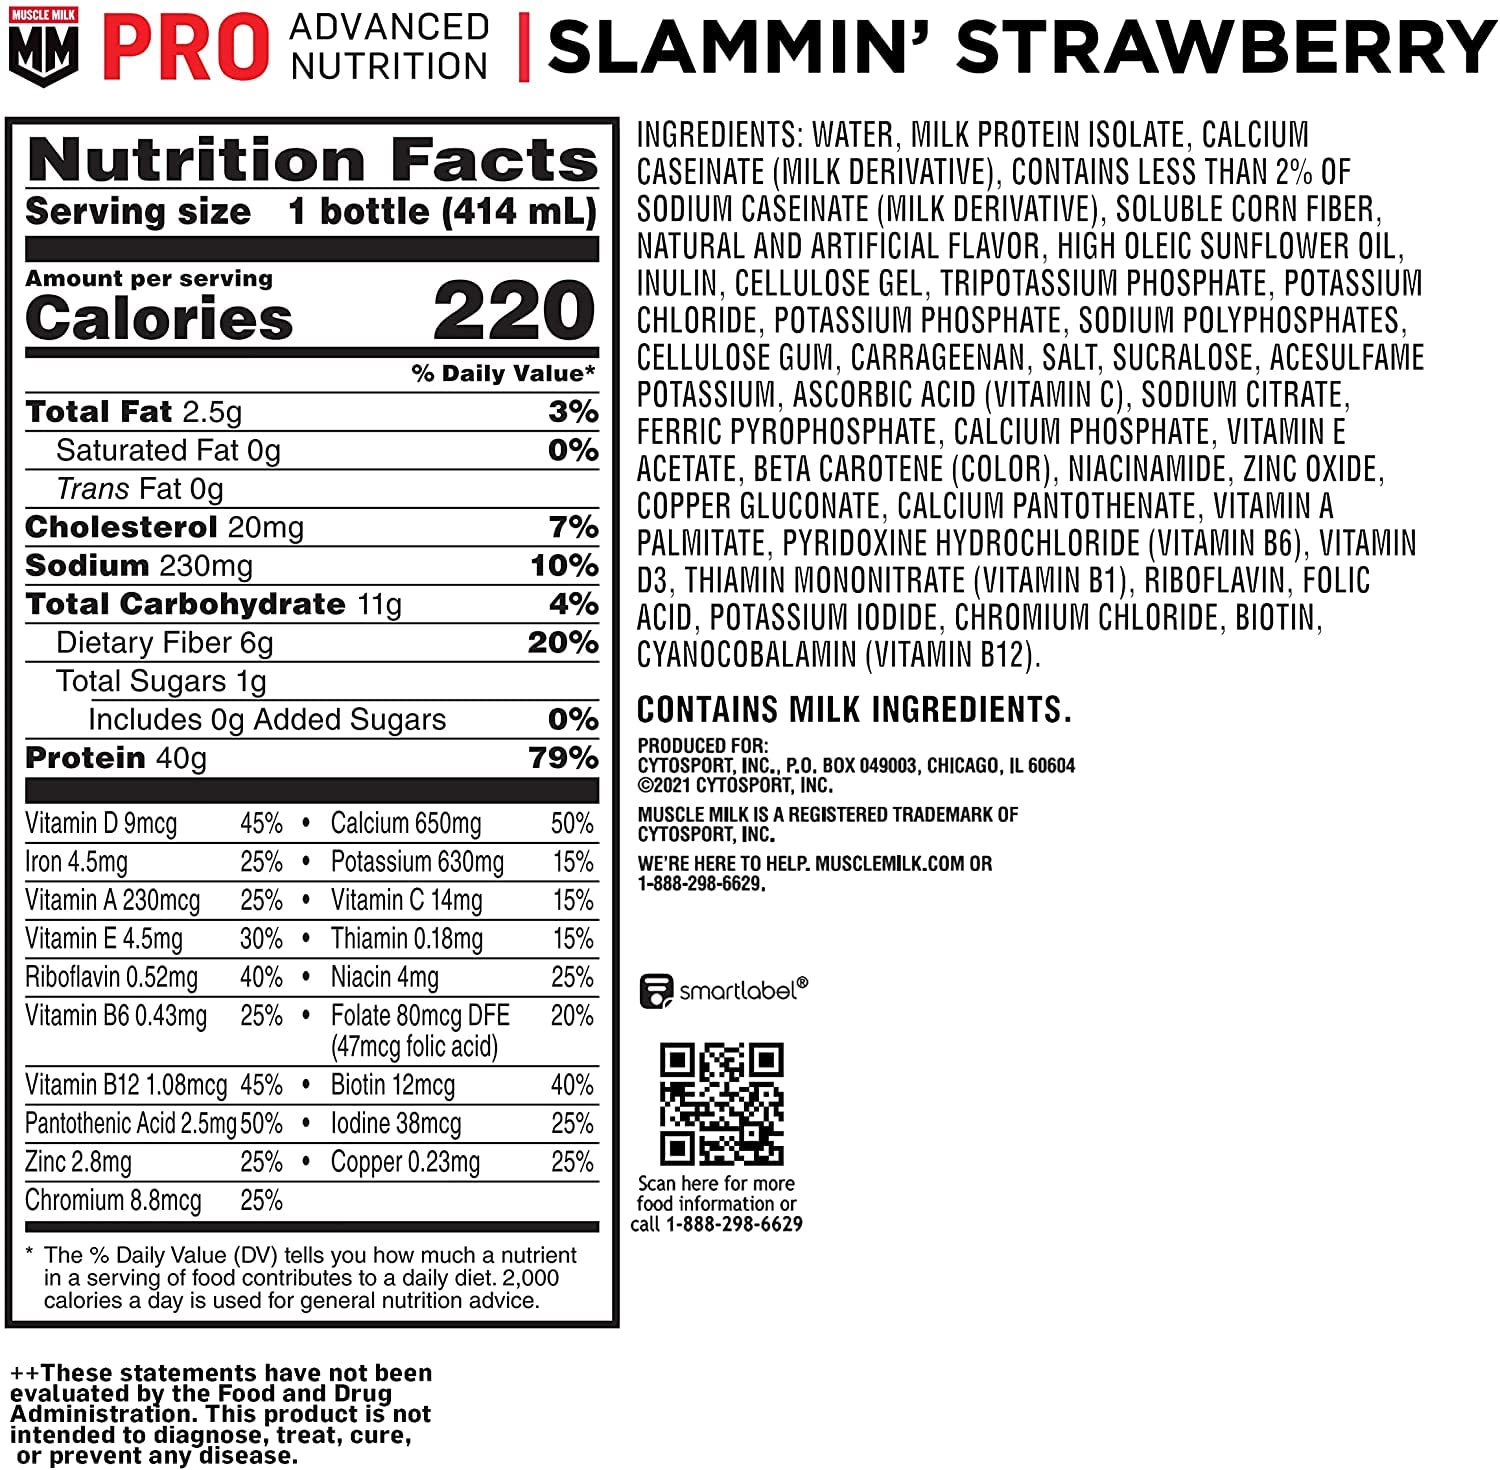 Muscle Milk Pro Advanced Nutrition Protein Shake, Slammin' Strawberry, 14 Fl Oz Bottle, 12 Pack, 40g Protein, 1g Sugar, 16 Vitamins & Minerals, 6g Fiber, Workout Recovery, Packaging May Vary